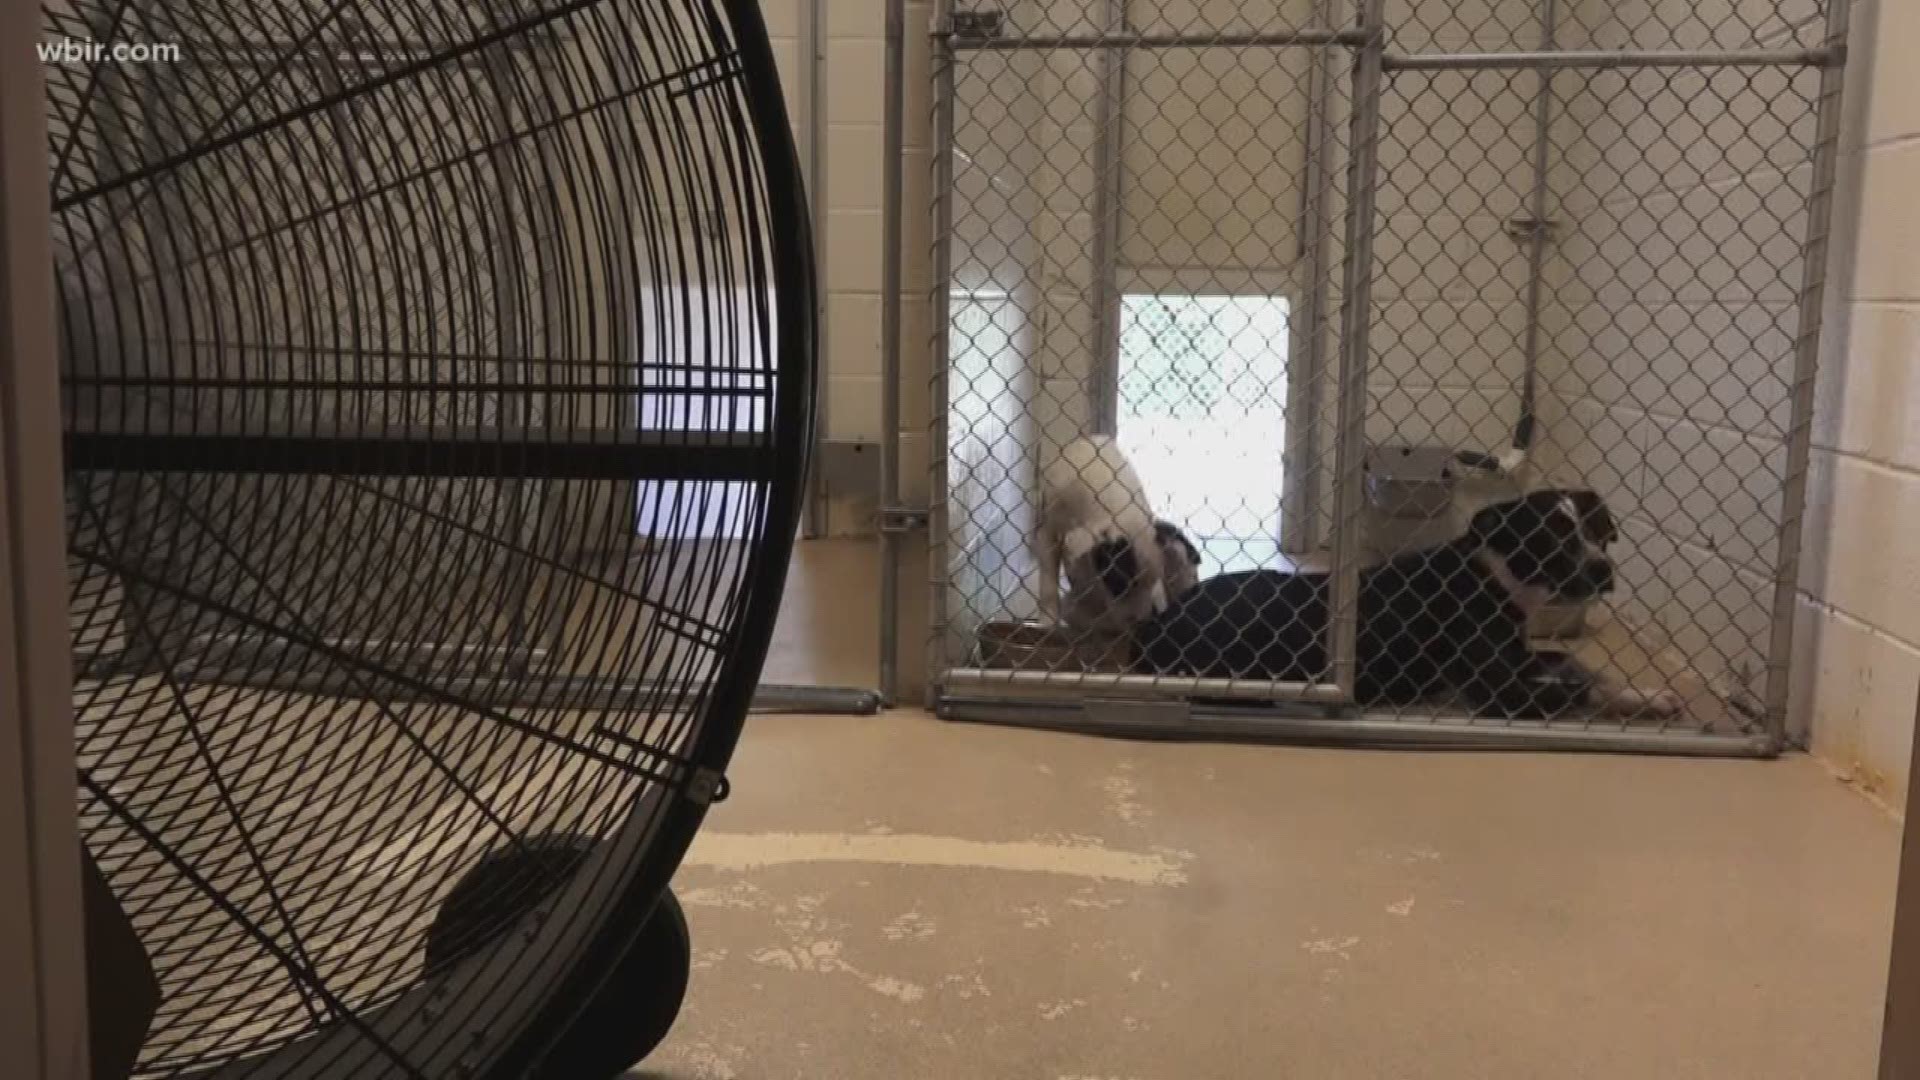 The main unit that heats and cools the area where the animals are kept will still take another week to replace, but HVAC companies and community members have donated both temporary and permanent fixtures to keep the shelter cool.